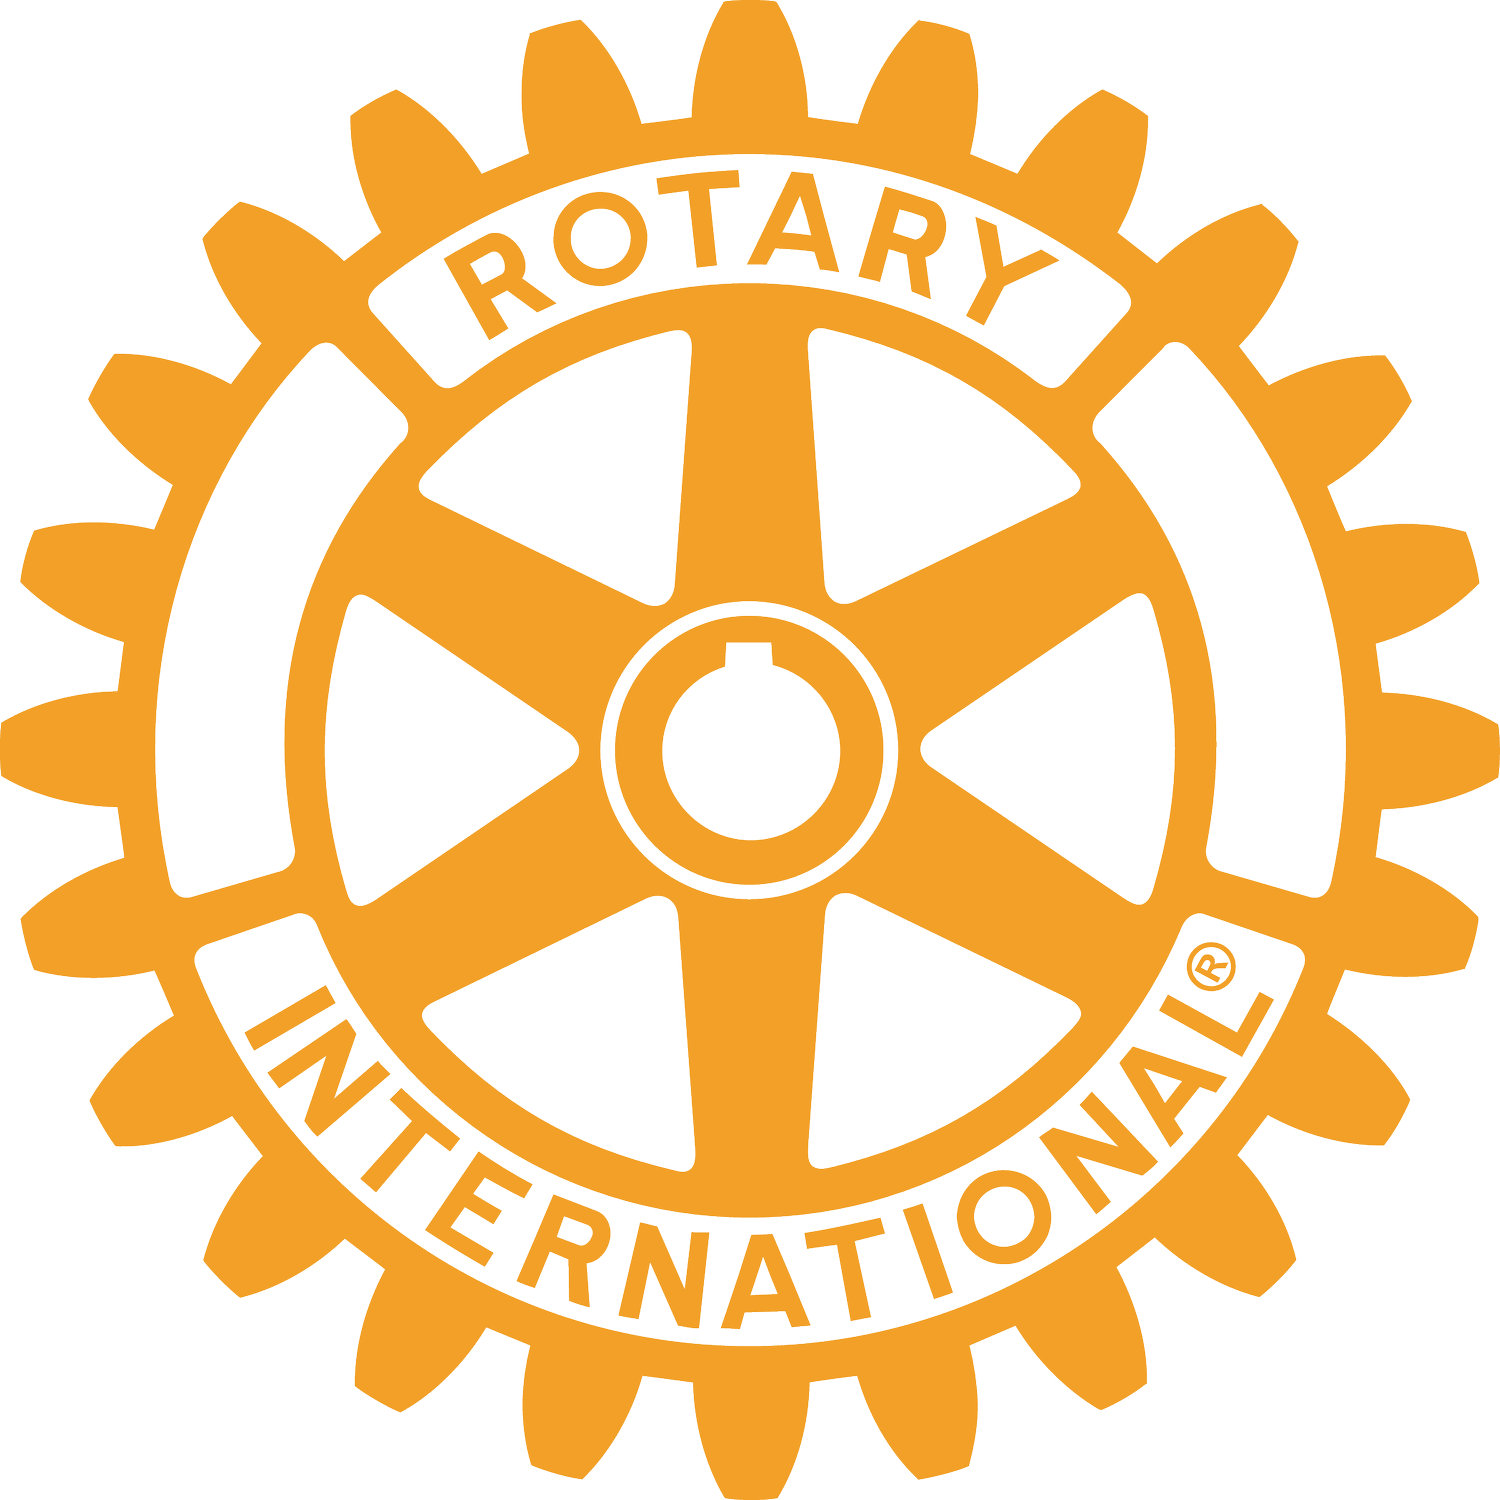 Langley Rotary Clubs